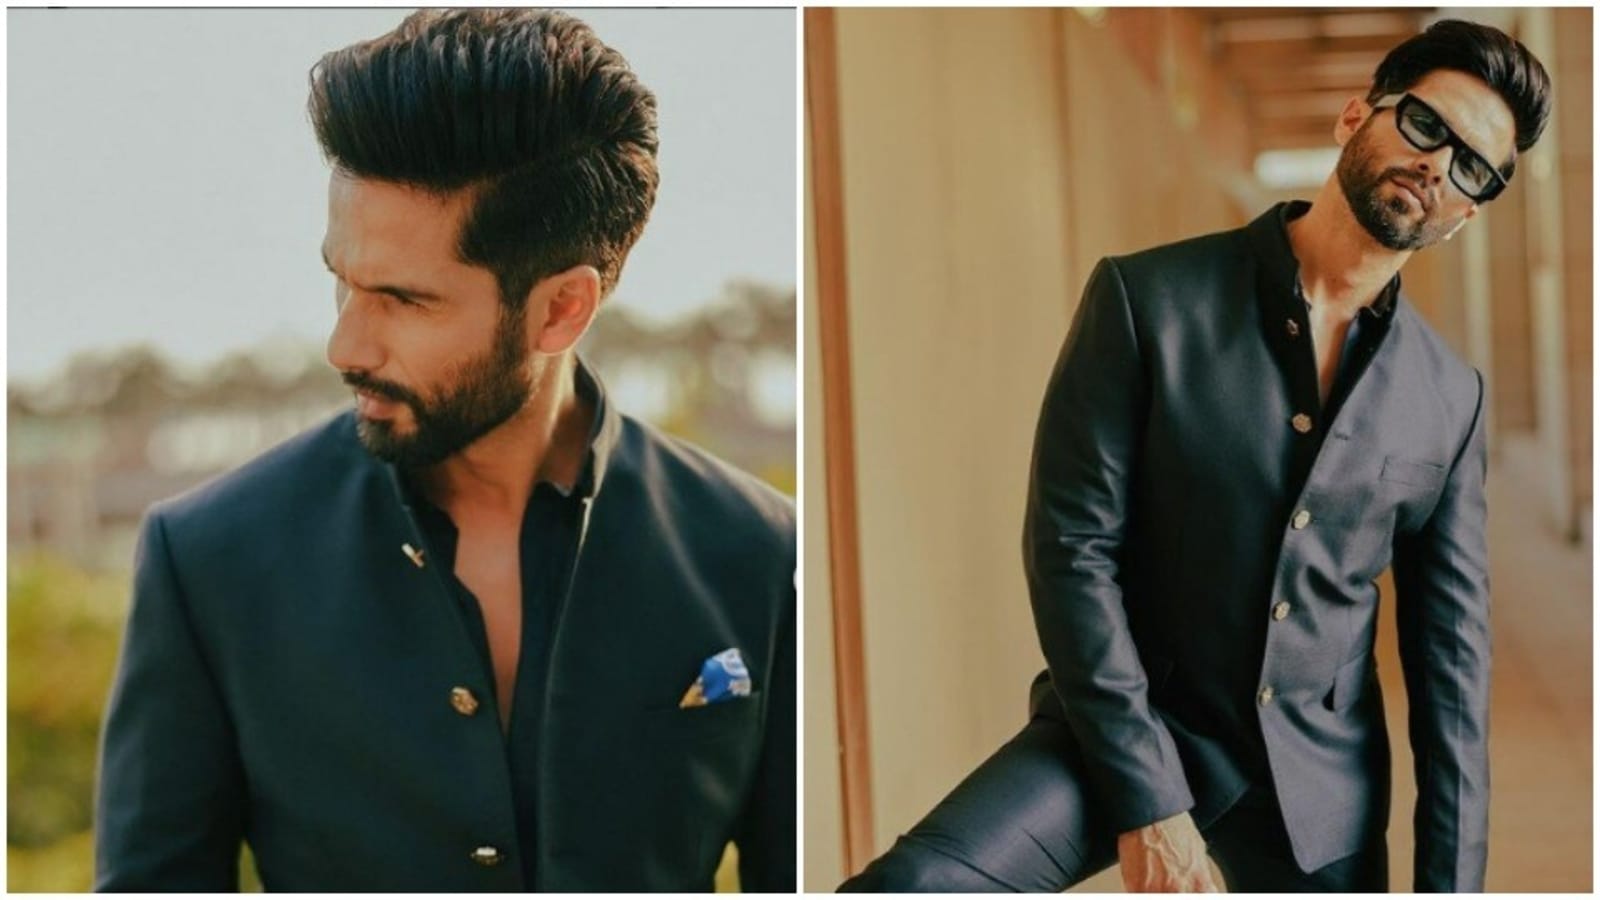 Shahid Kapoor shows us how to suit up right | Hindustan Times